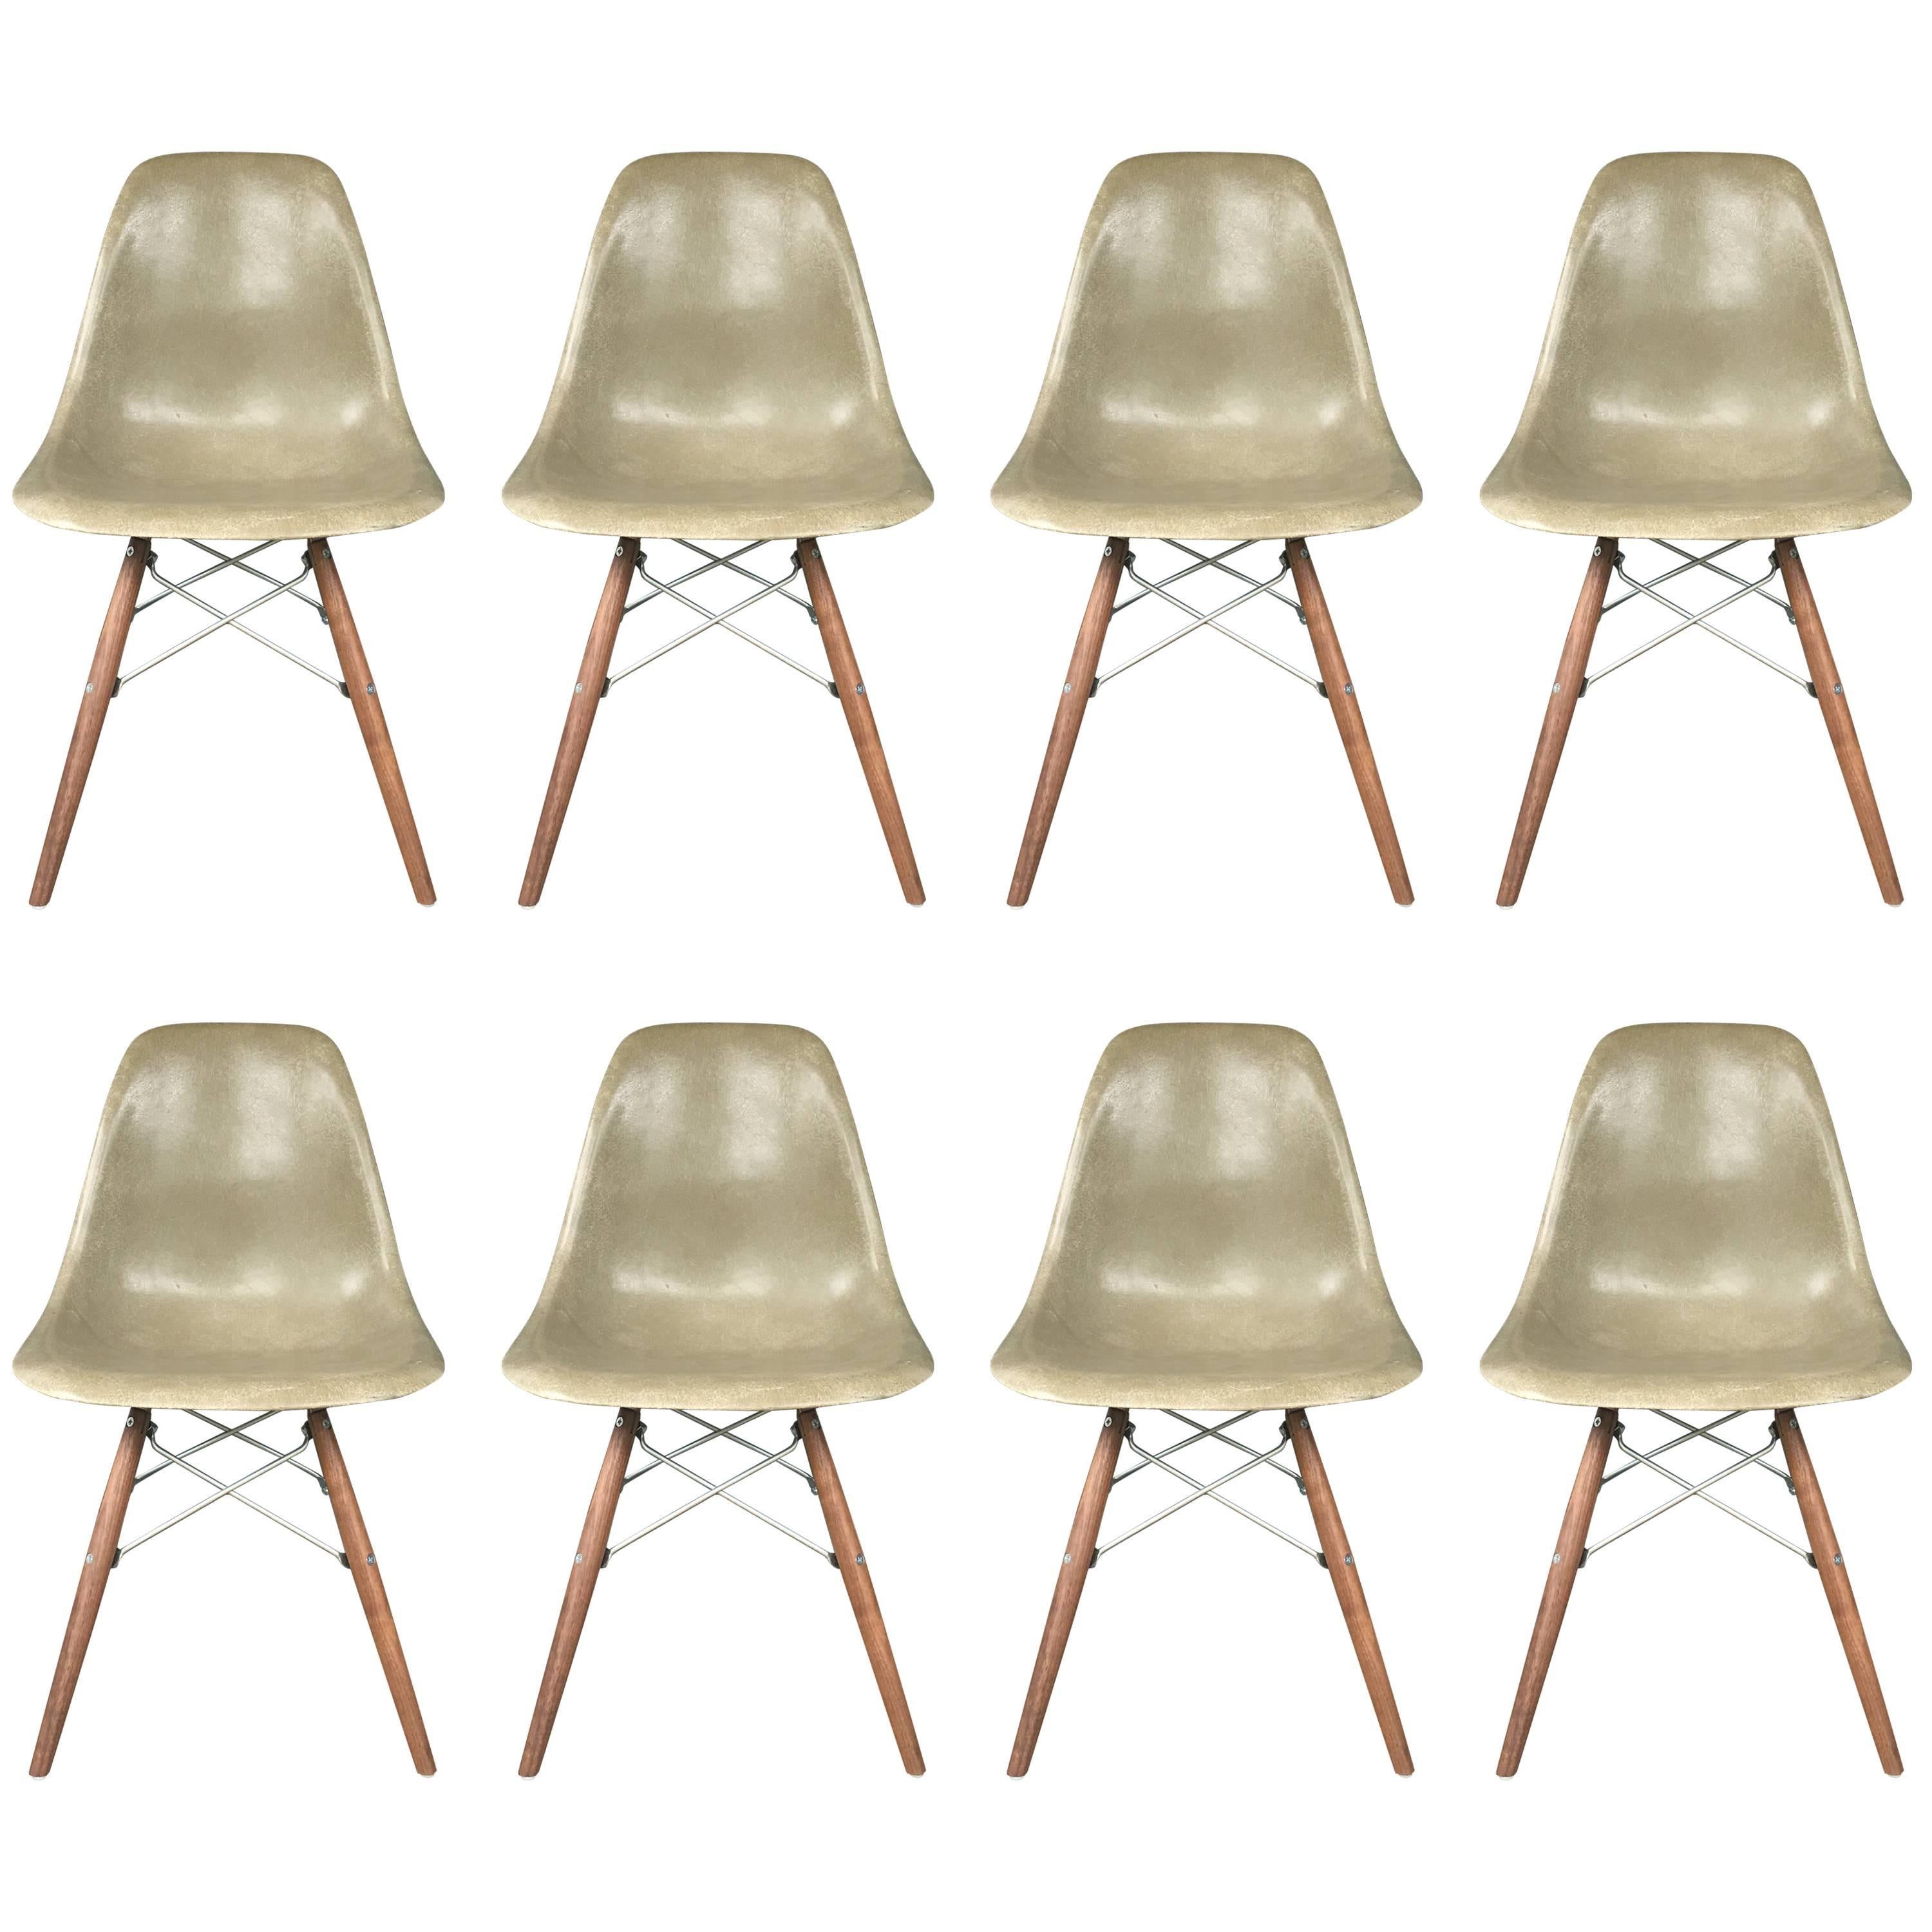 Eight Herman Miller Eames Dining Chairs in Raw Umber